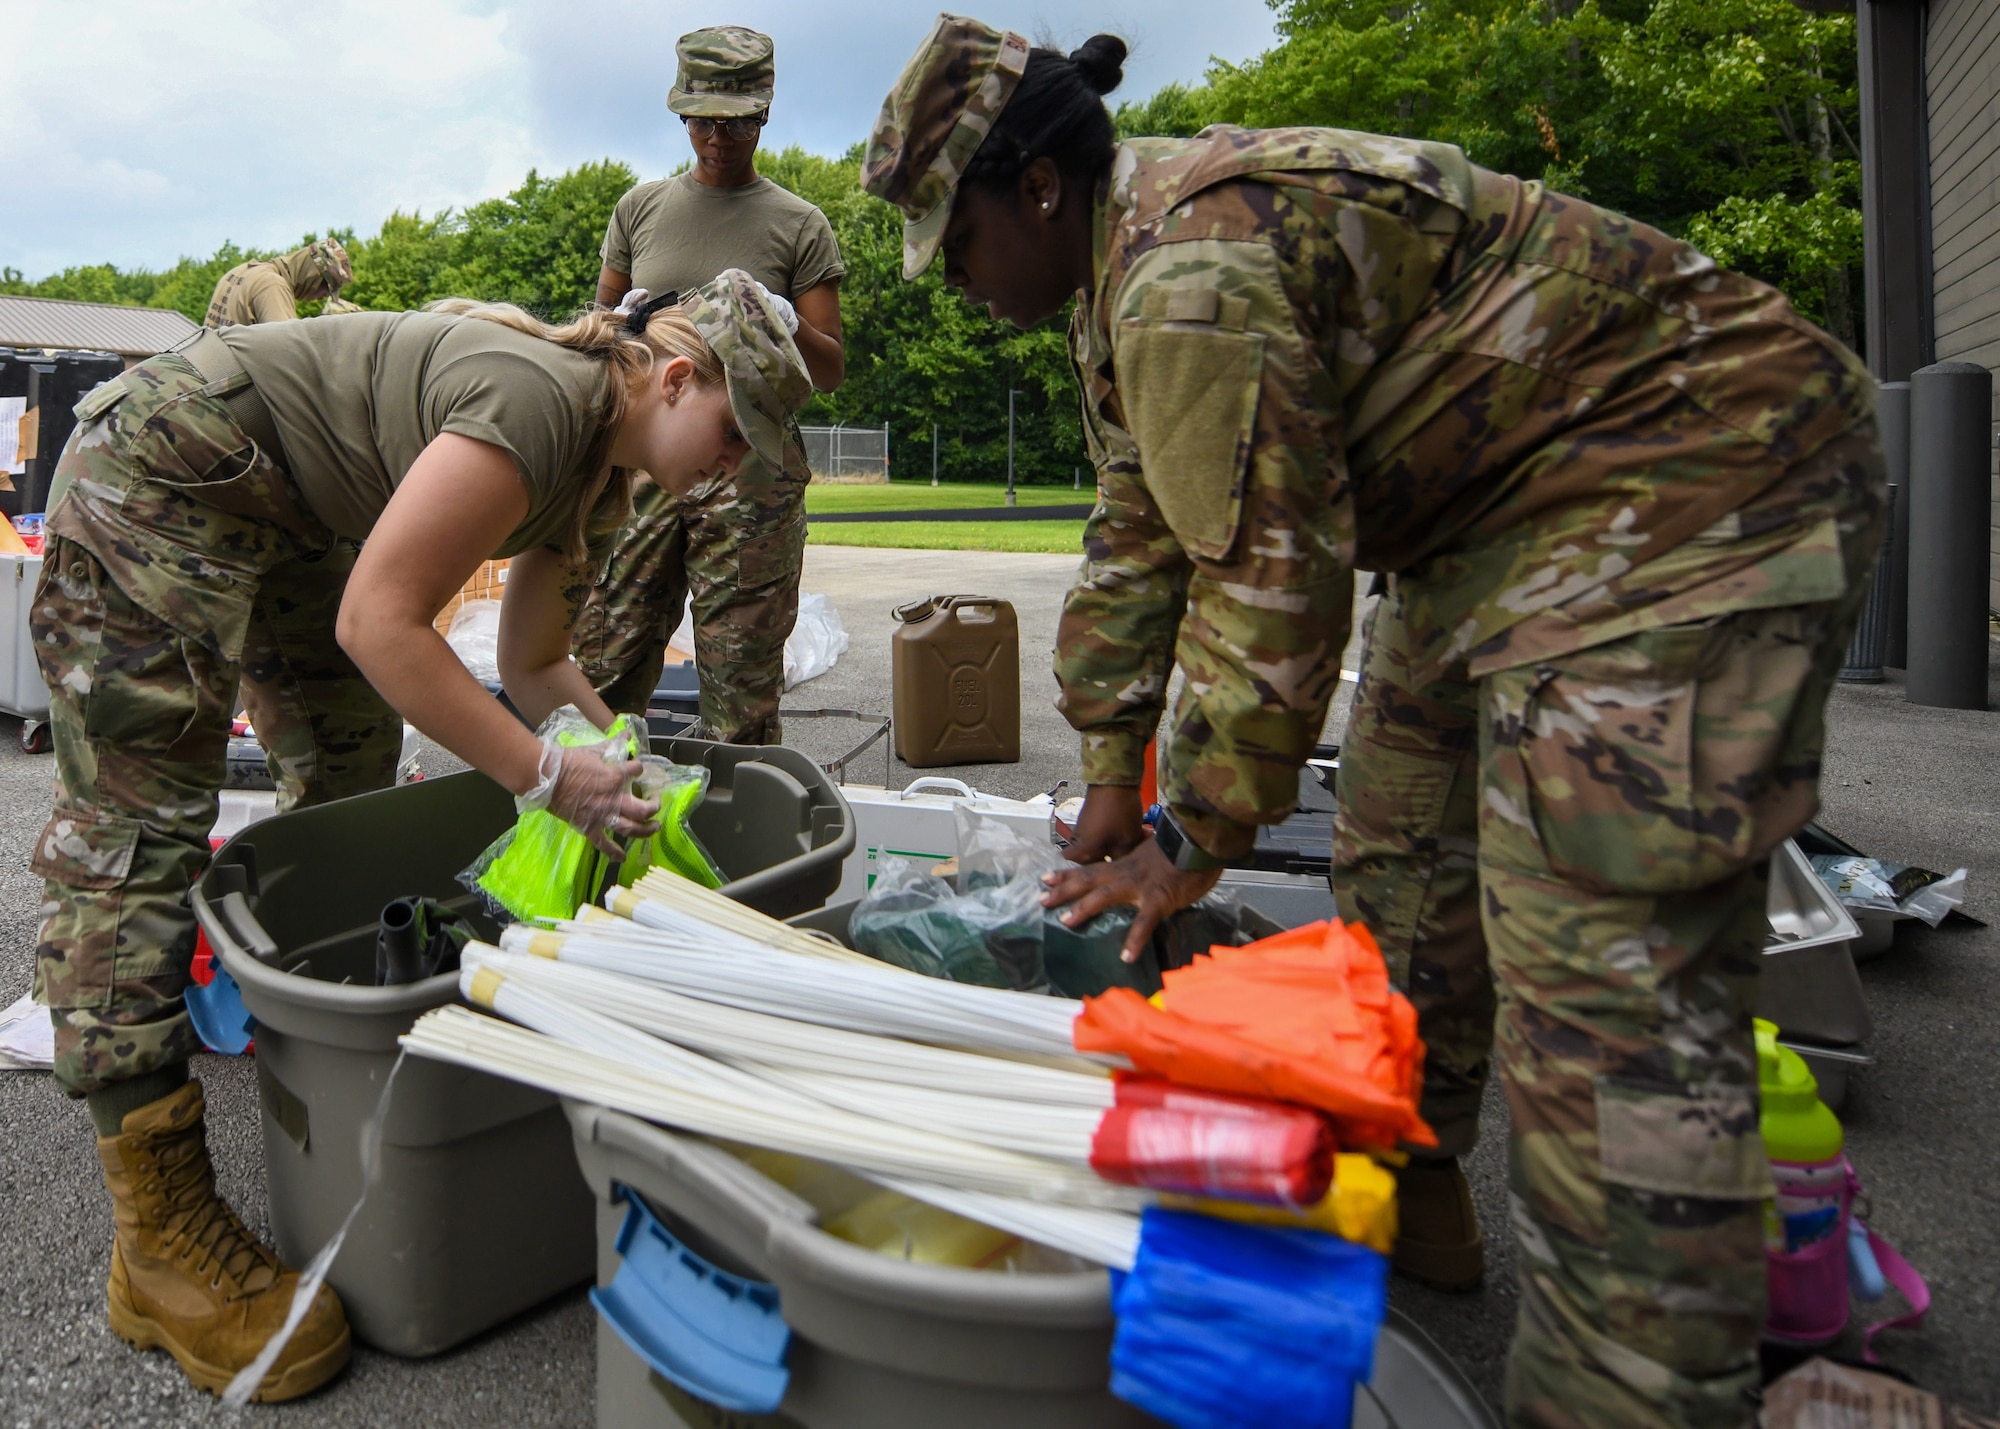 The 910th Force Support Squadron's services section completed home station annual tour training to hone career-specific skills.